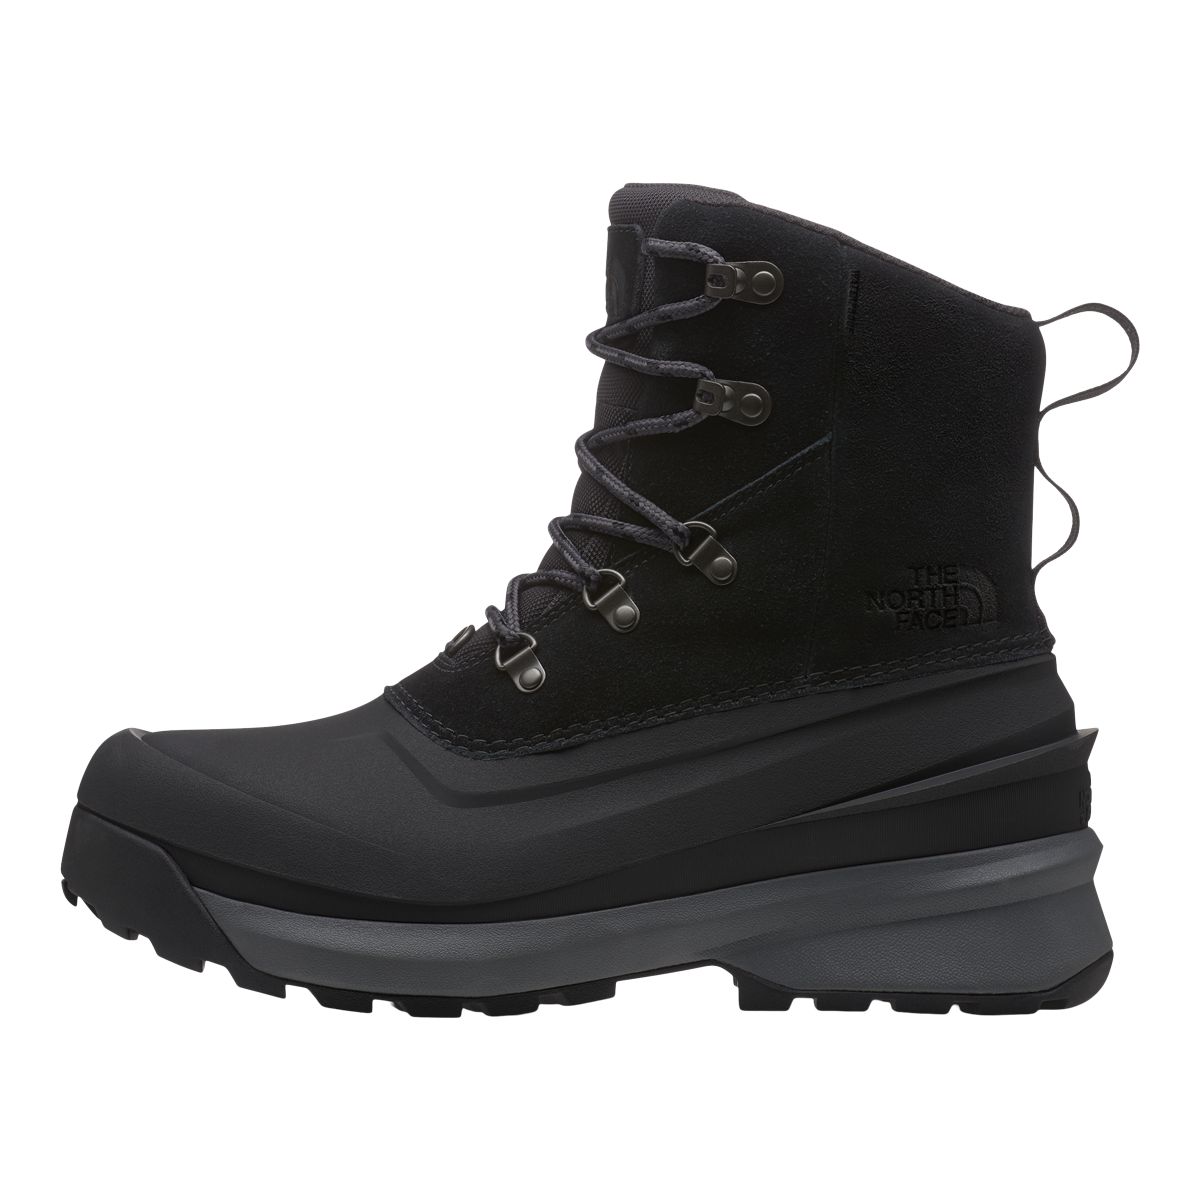 Image of The North Face Men's Chilkat V Lace Insulated Waterproof Winter Boots